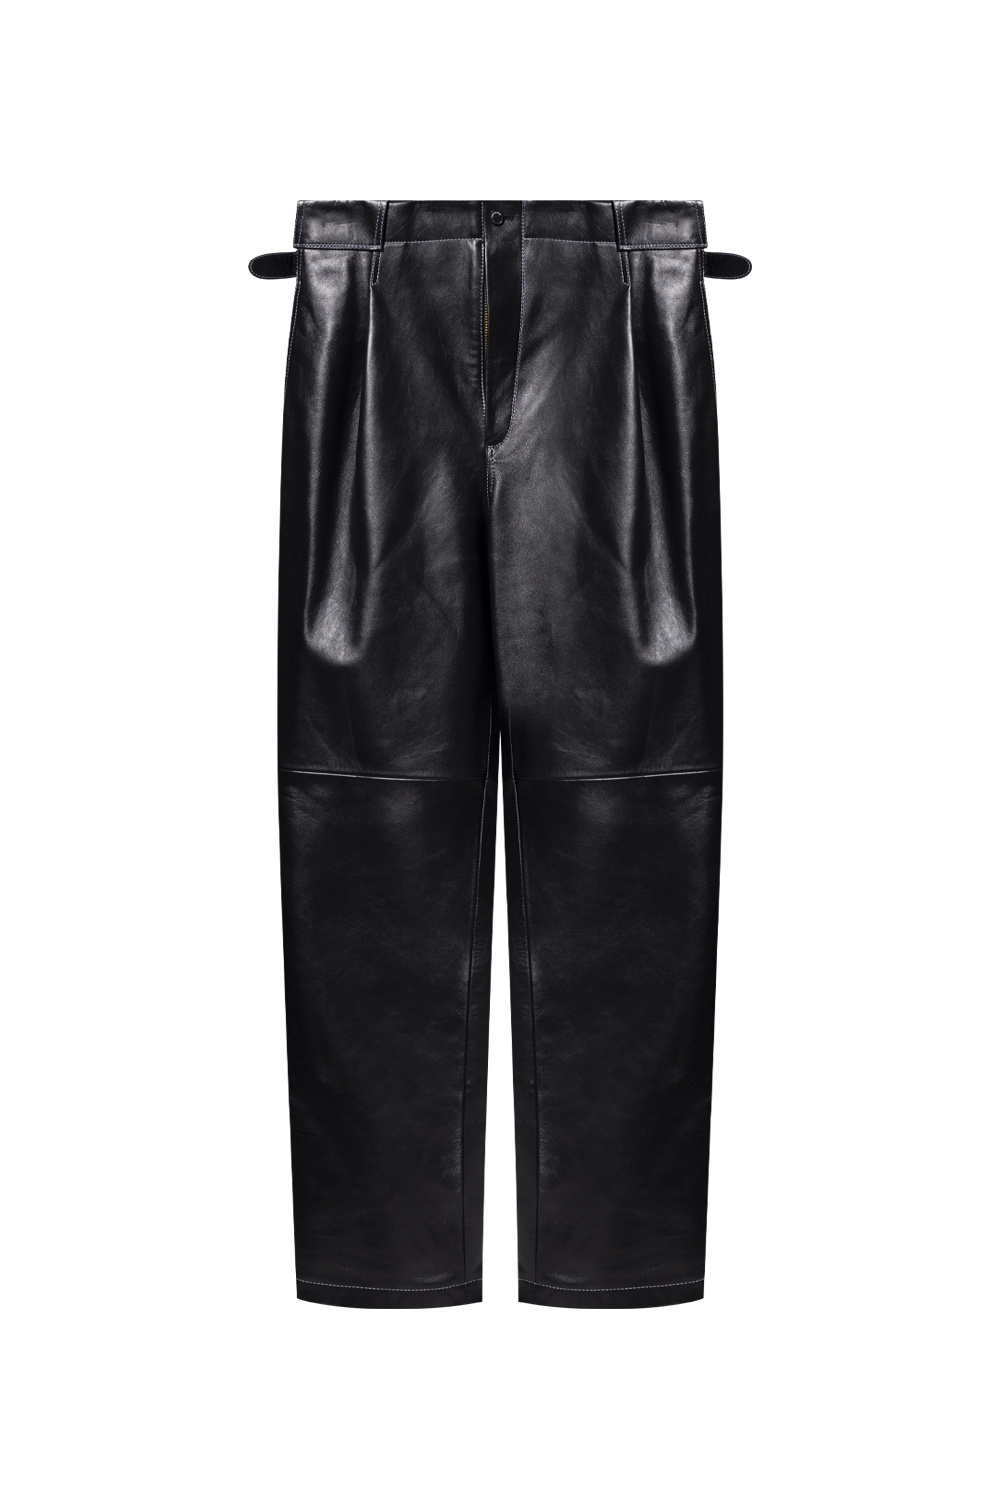 The Mannei ‘Shobak’ leather trousers